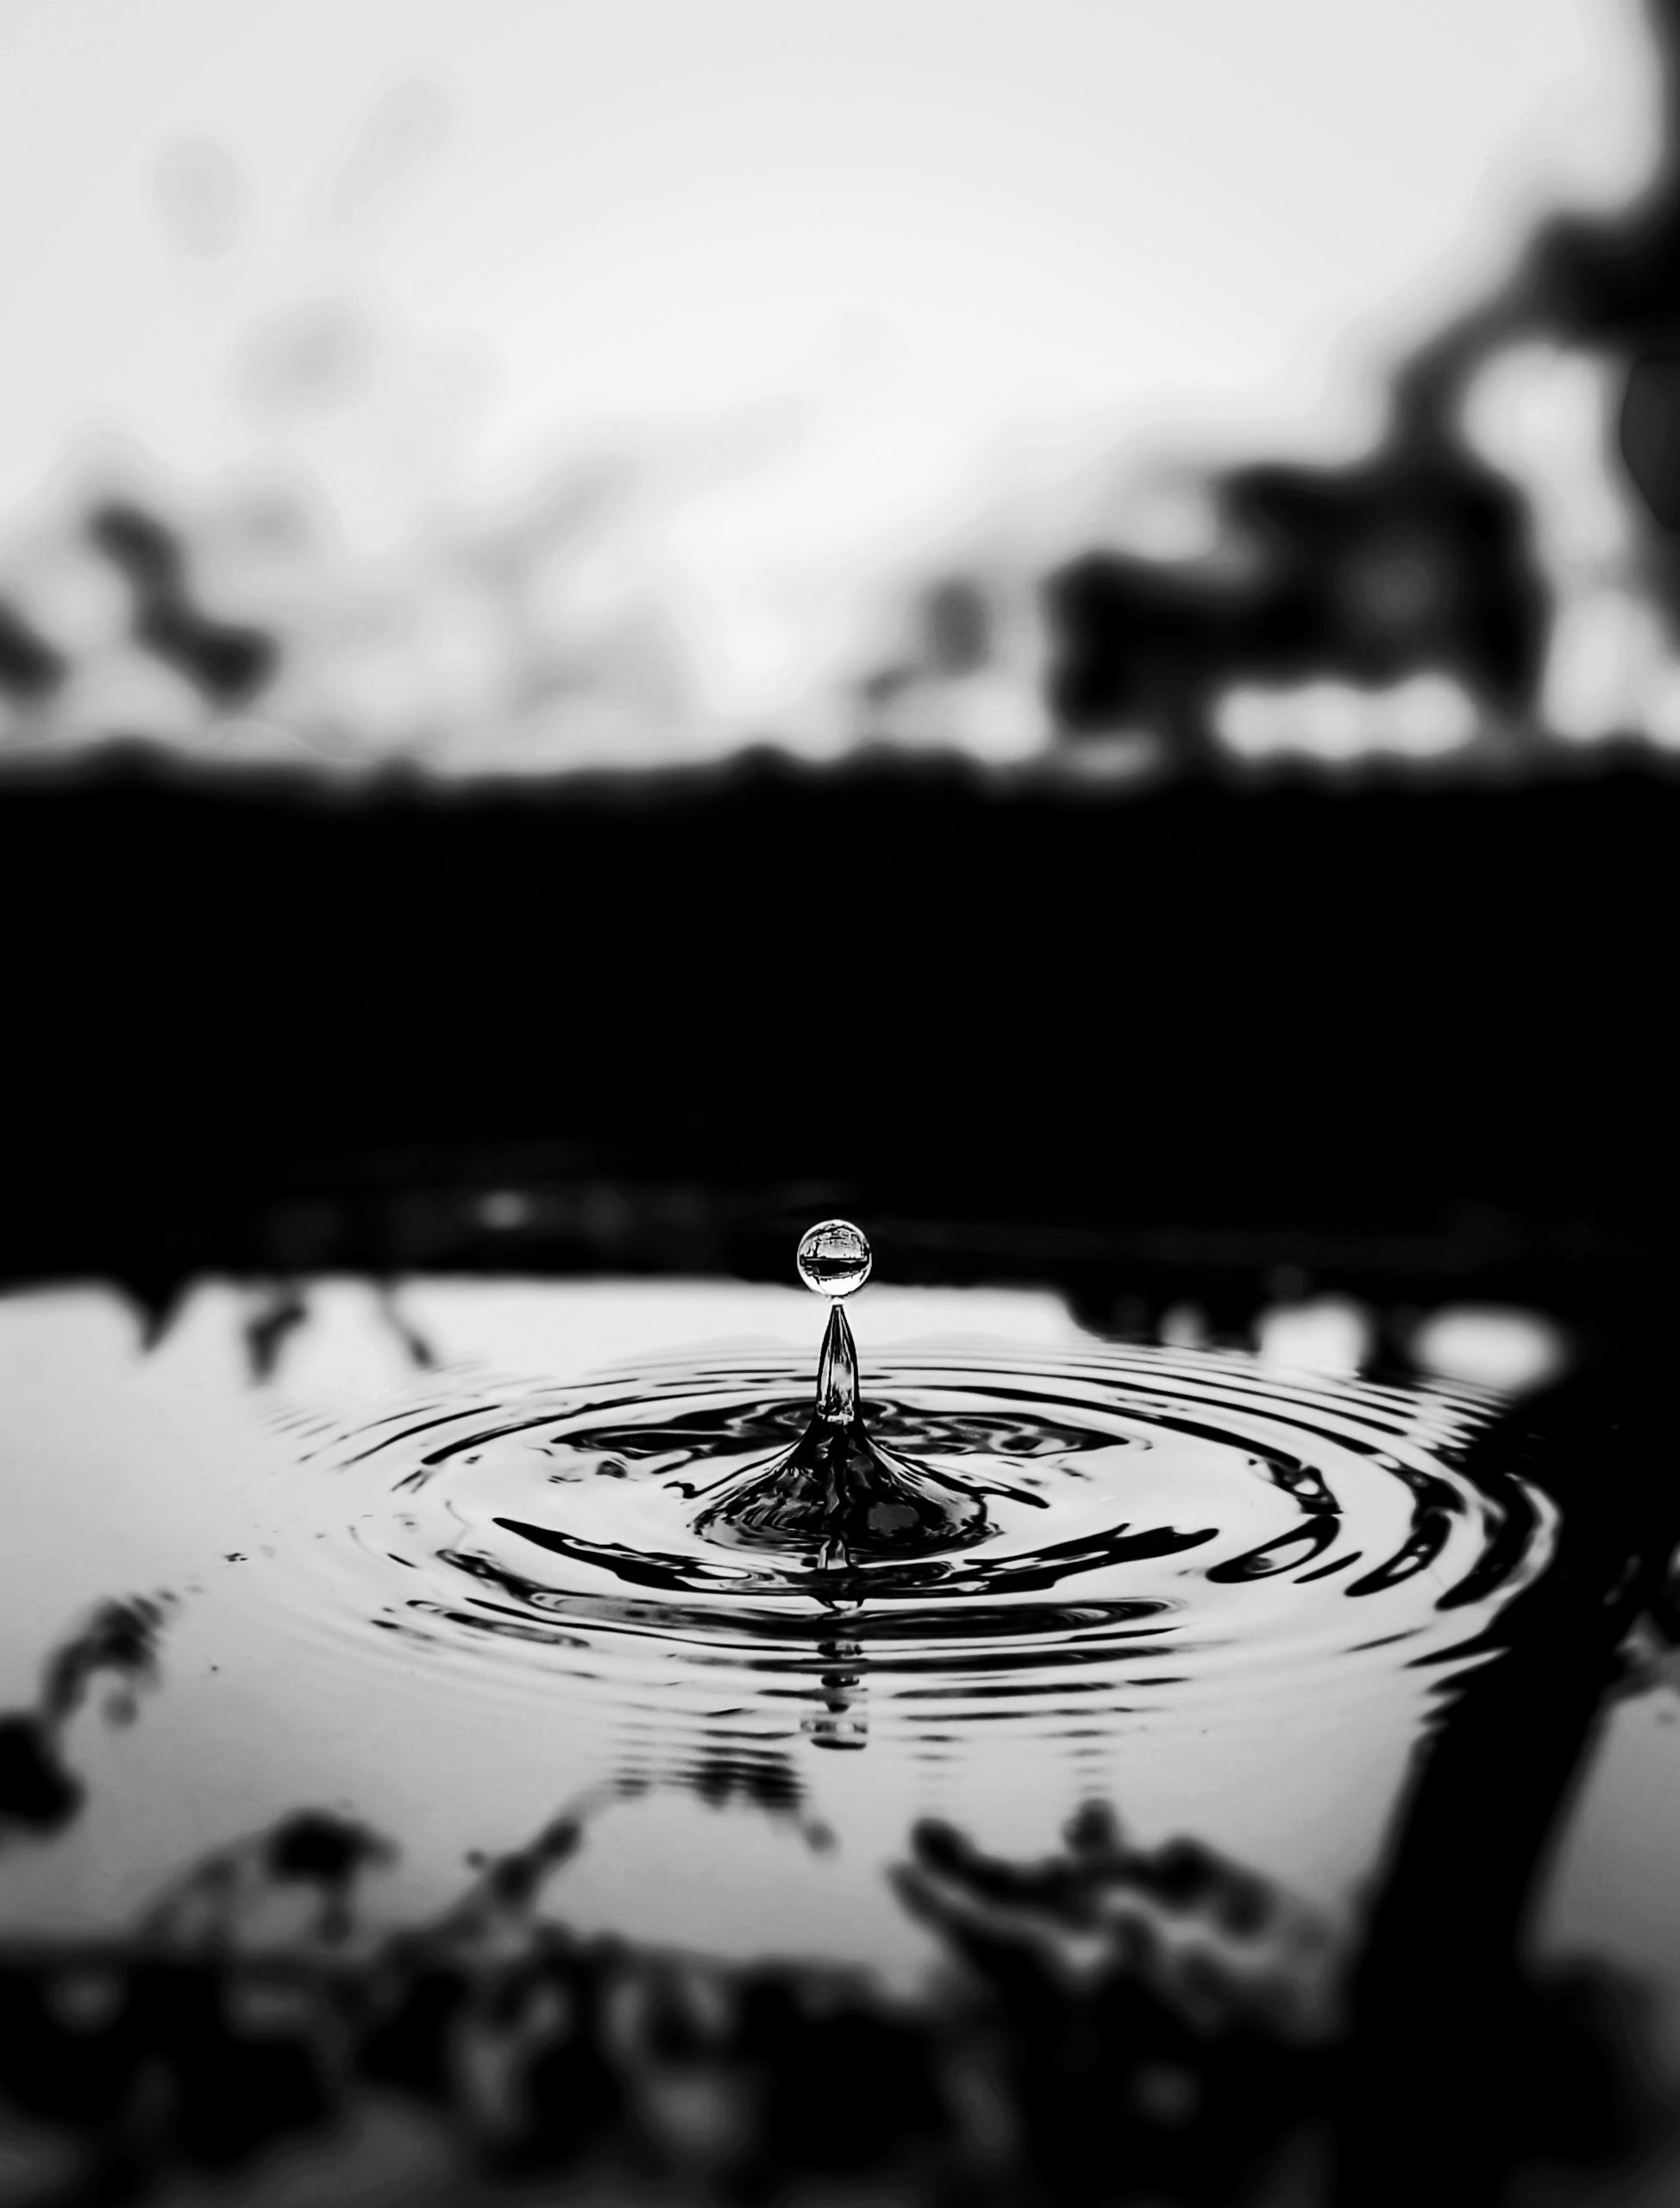 Droplet bouncing in the water